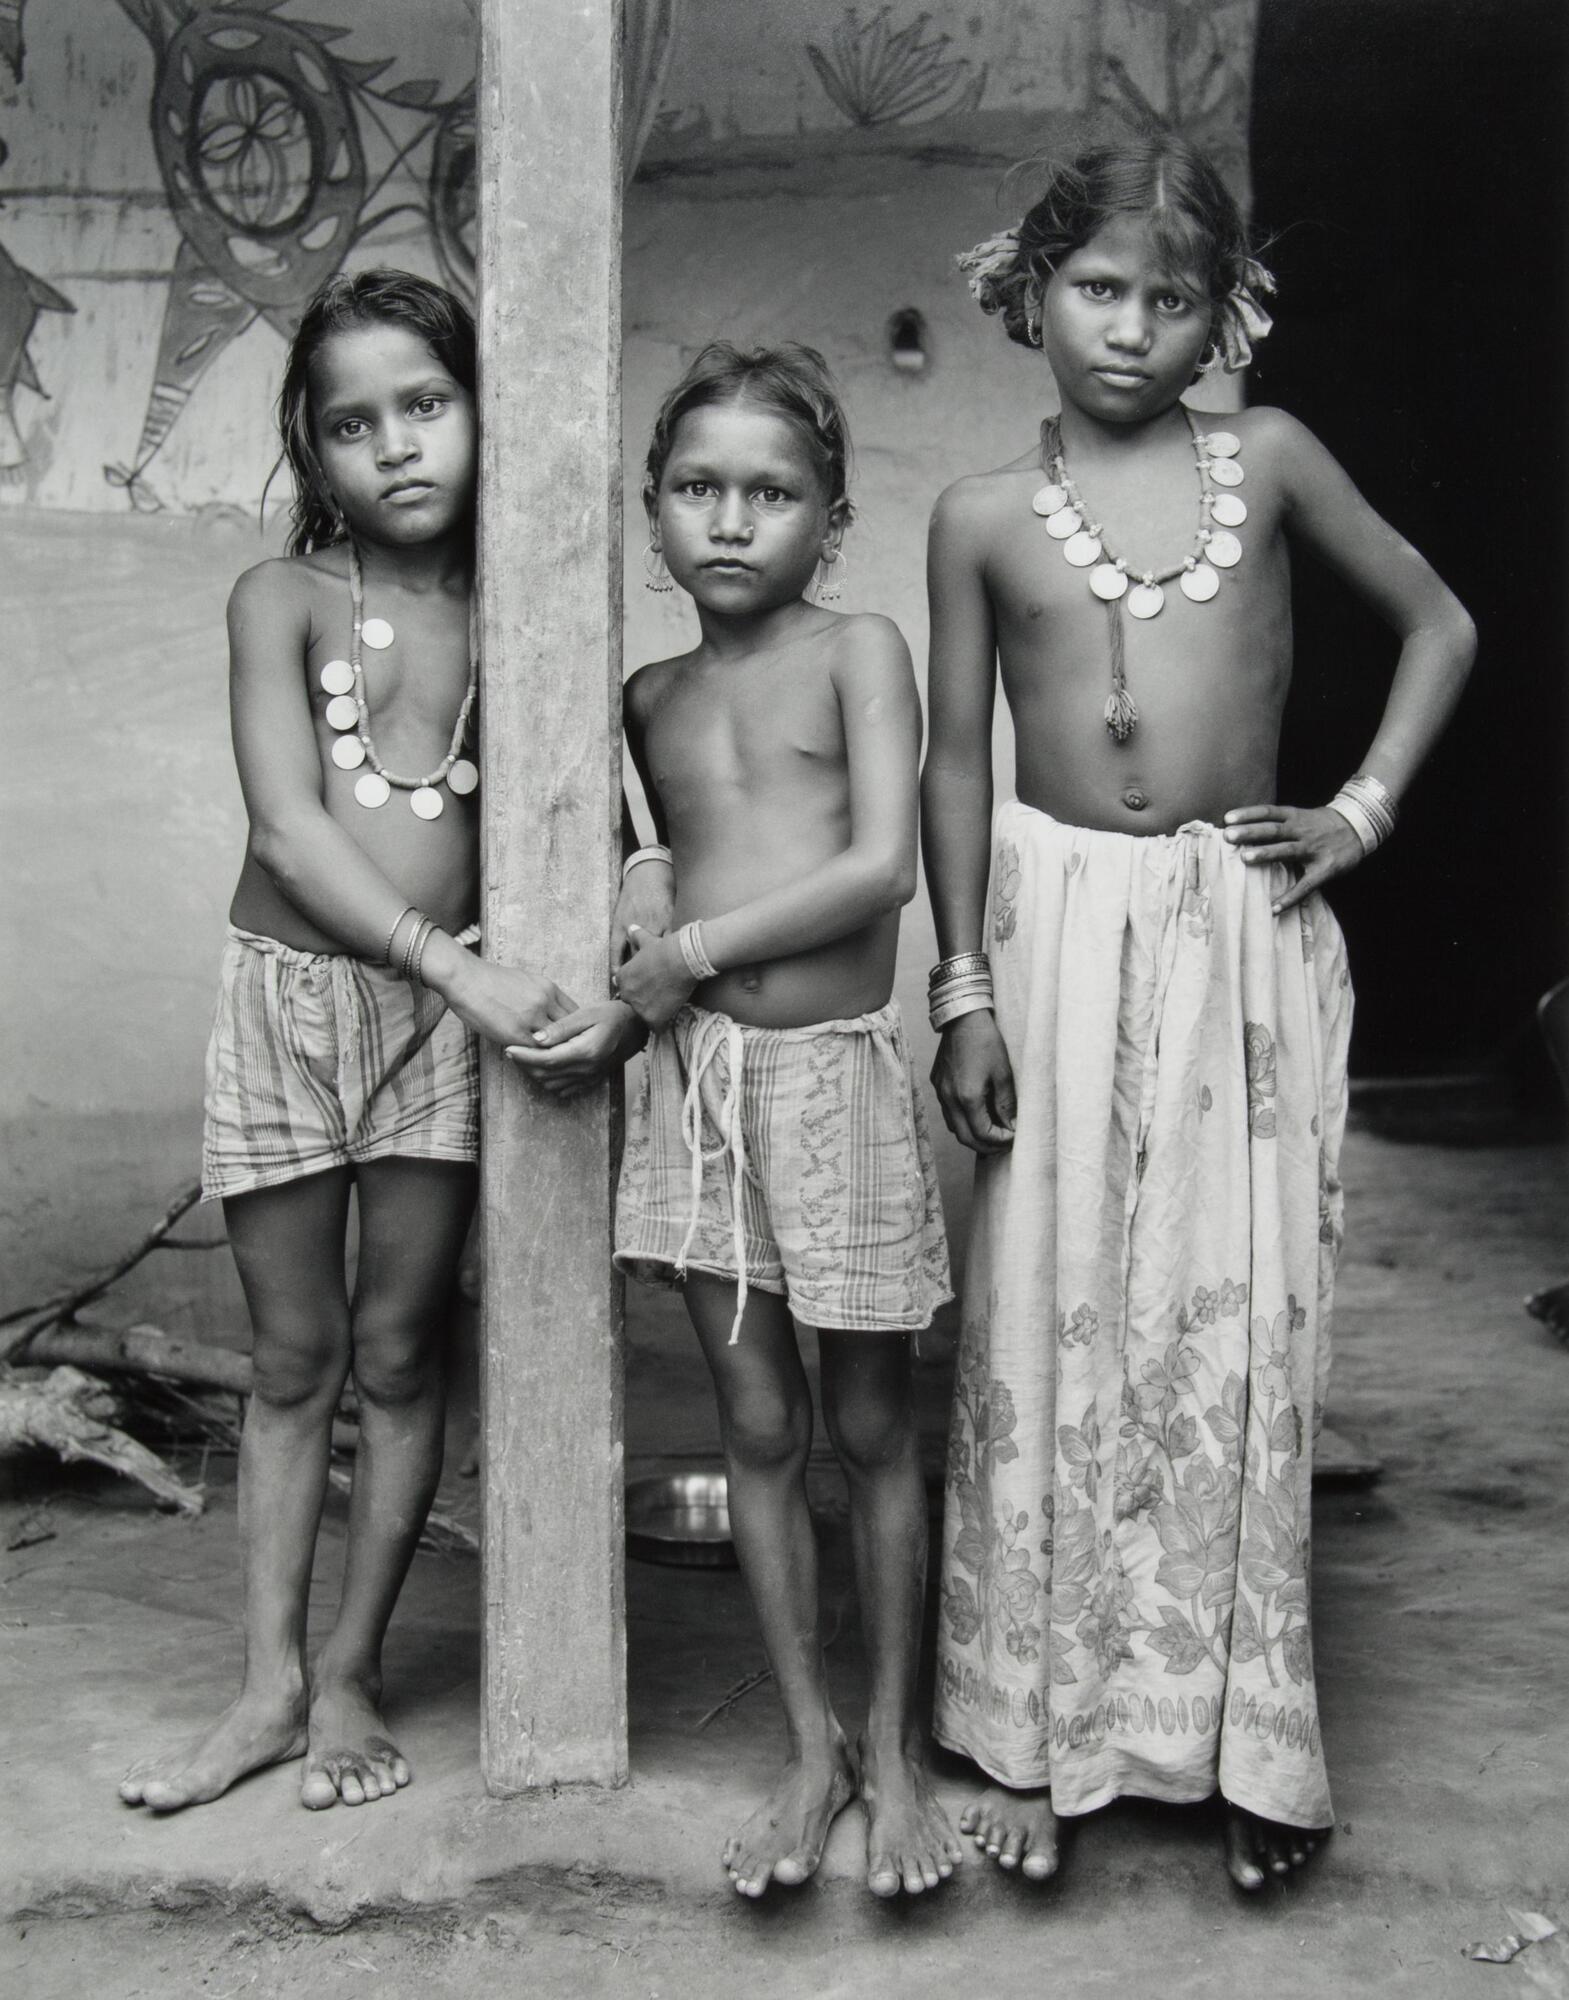 Three children standing next to a column. They are all barefoot and wearing similar beaded necklaces. Two are in shorts, one is in a long skirt.